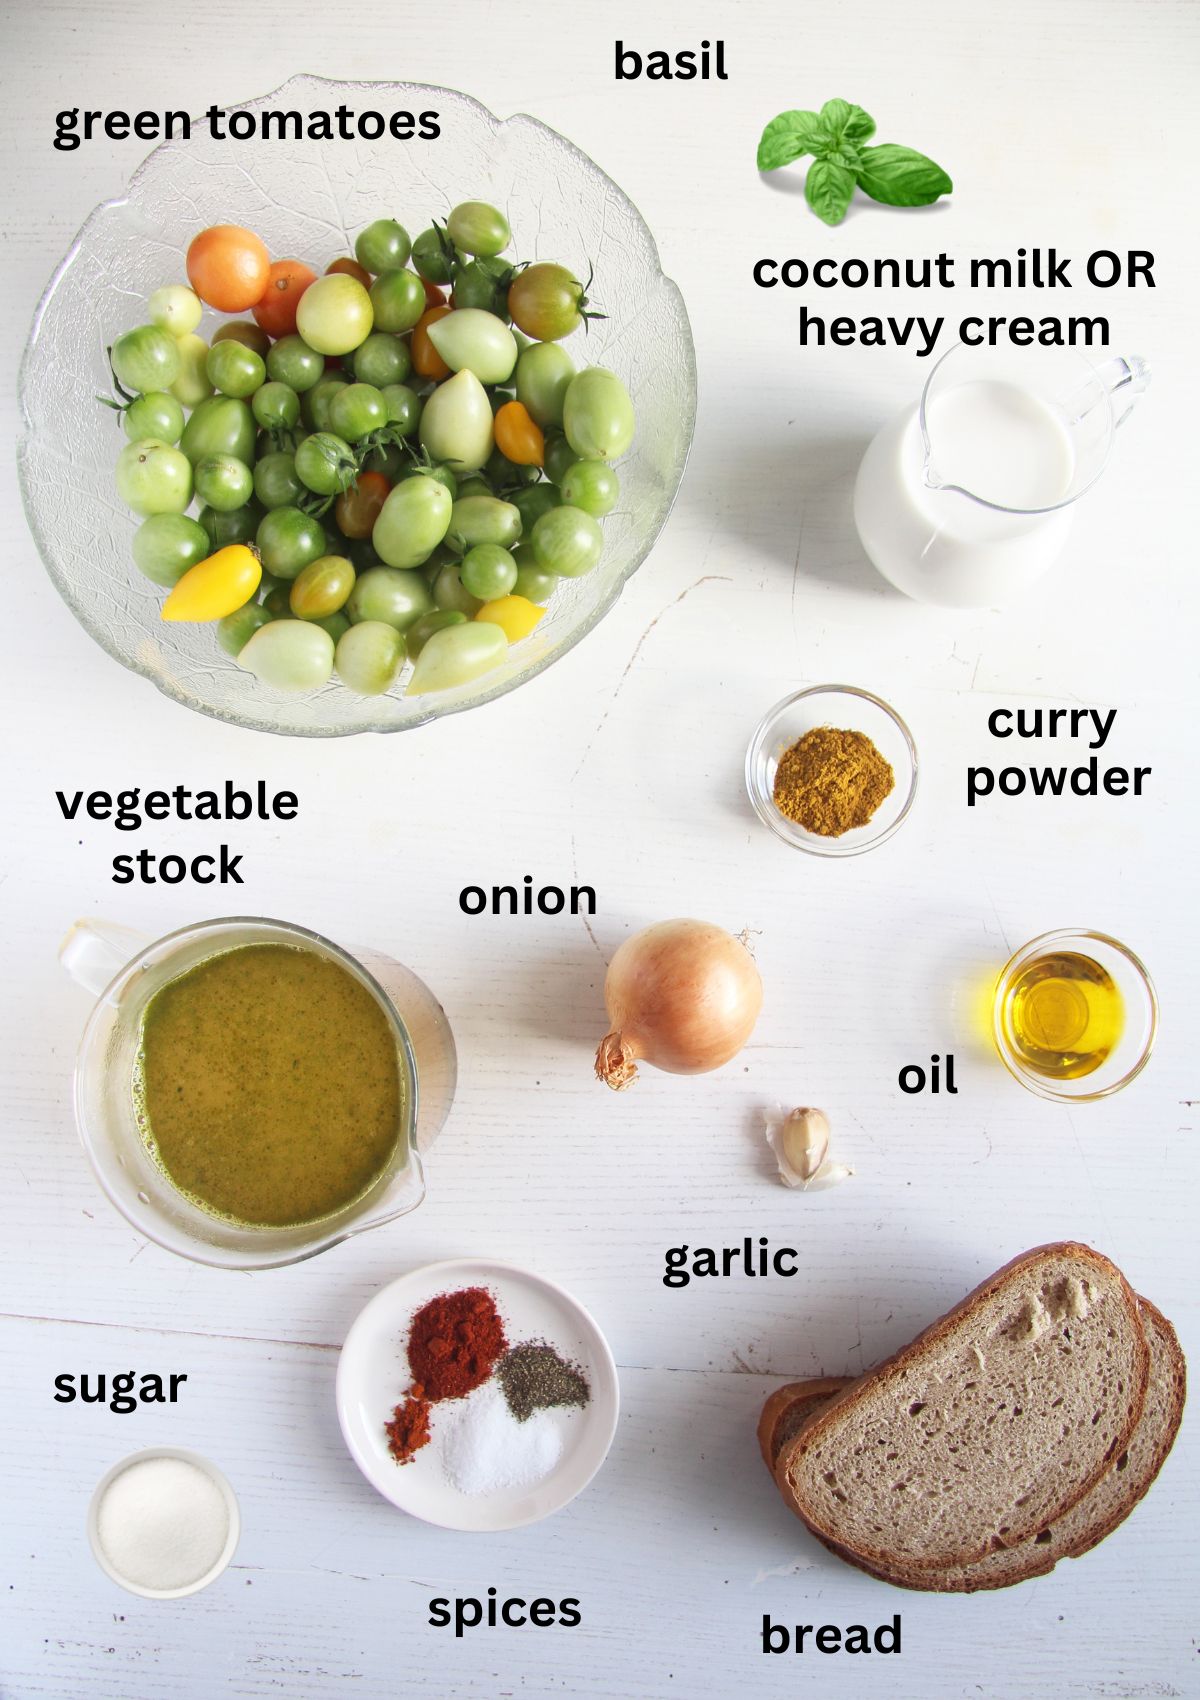 listed ingredients for making green tomato soup with bread croutons.